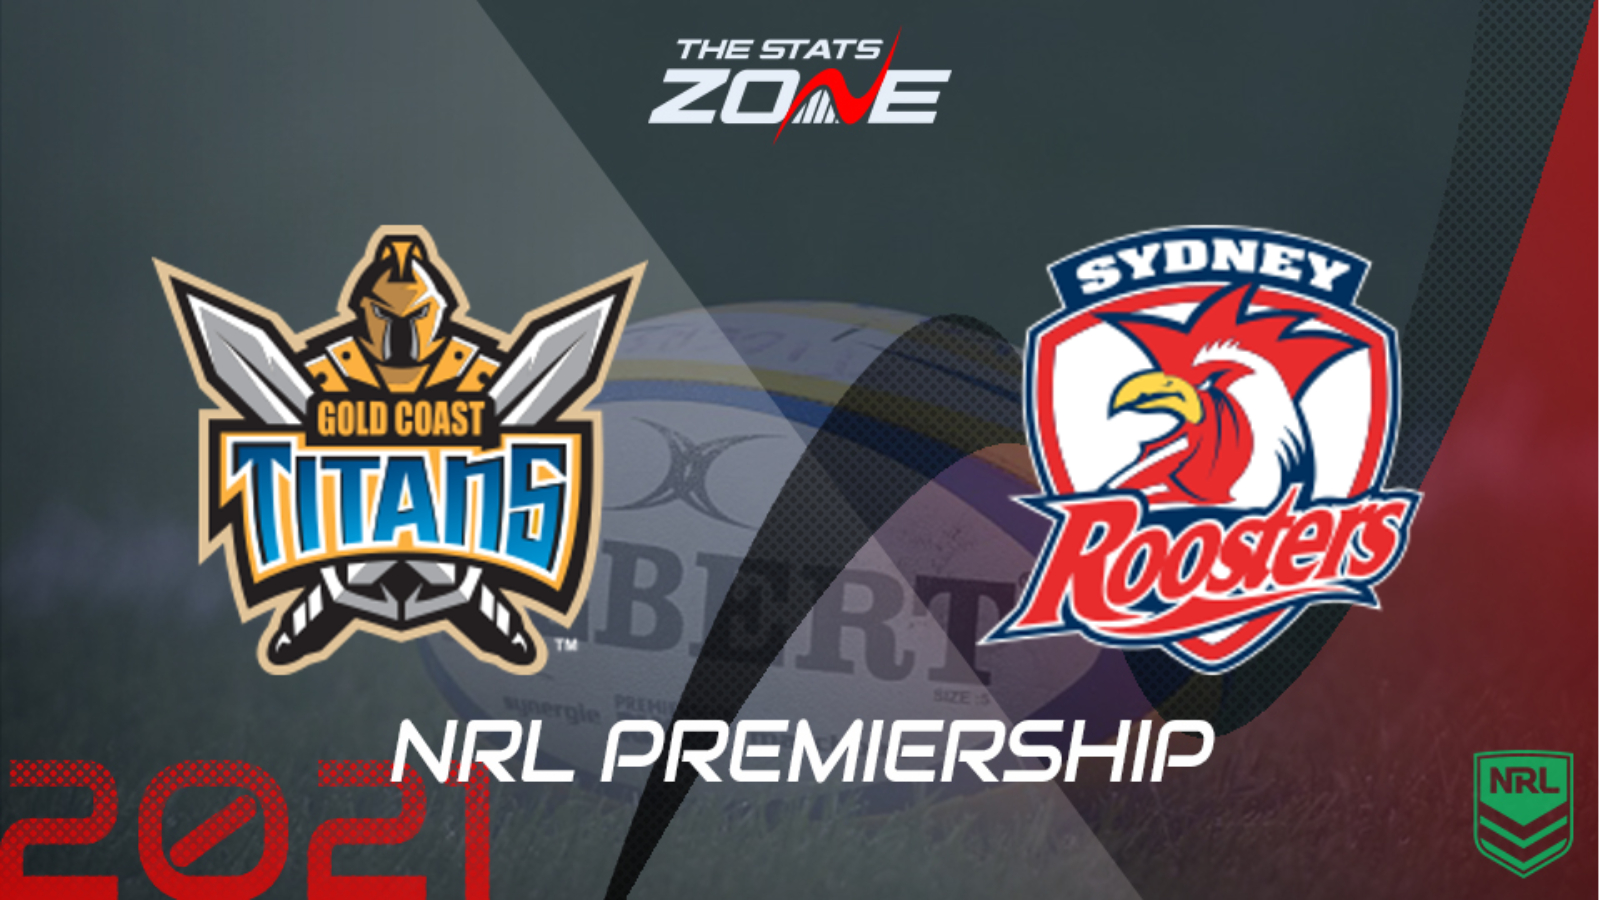 2021 Nrl Gold Coast Titans Vs Sydney Roosters Preview Prediction The Stats Zone [ 900 x 1600 Pixel ]